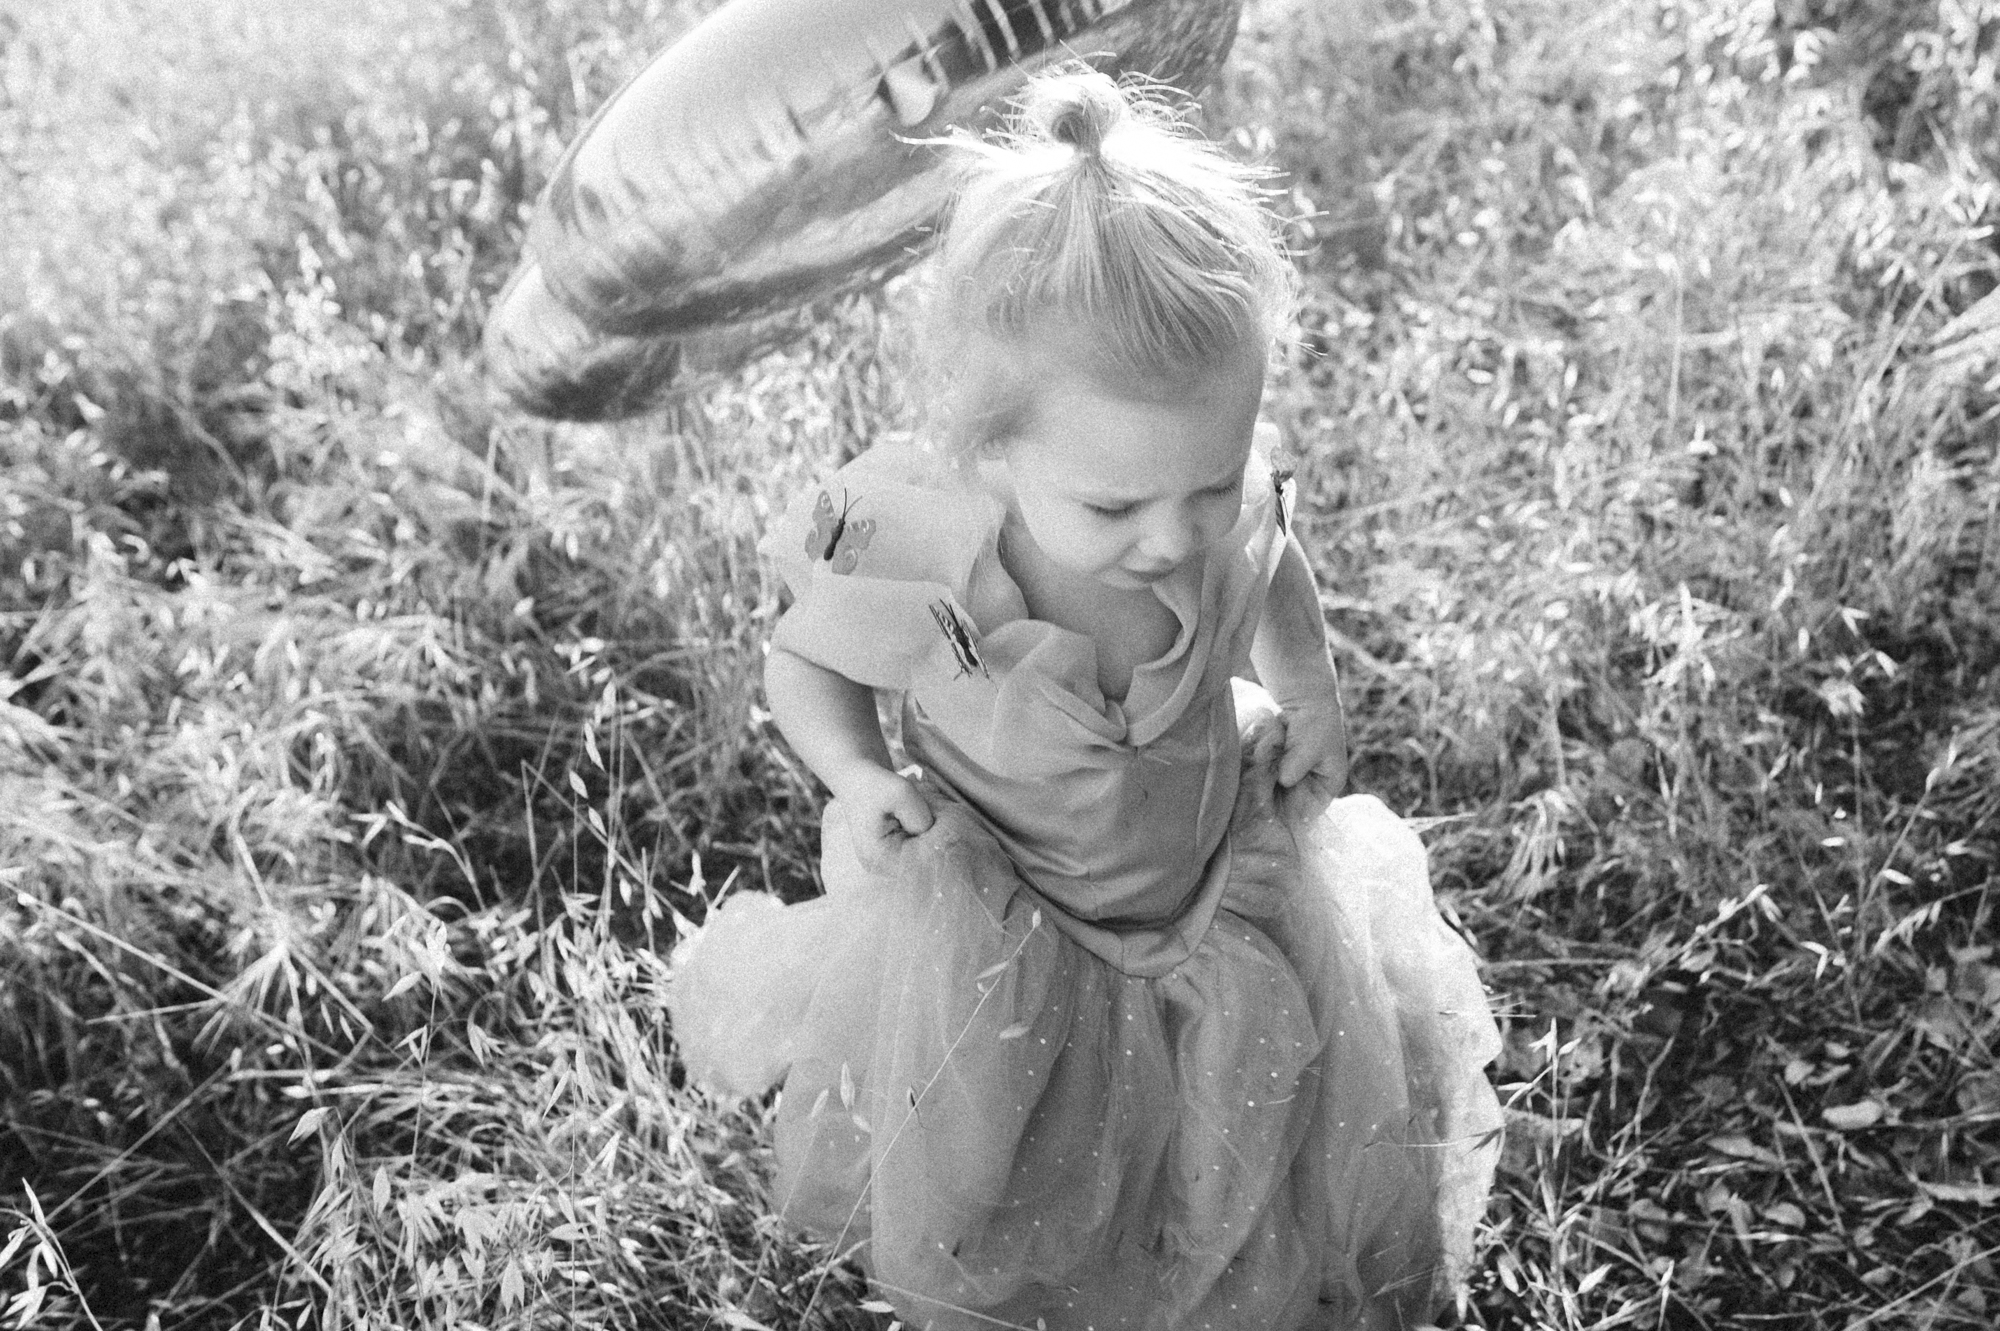 San Diego 3 Year Old Birthday Princess Shoot by Kylie Rae Photography